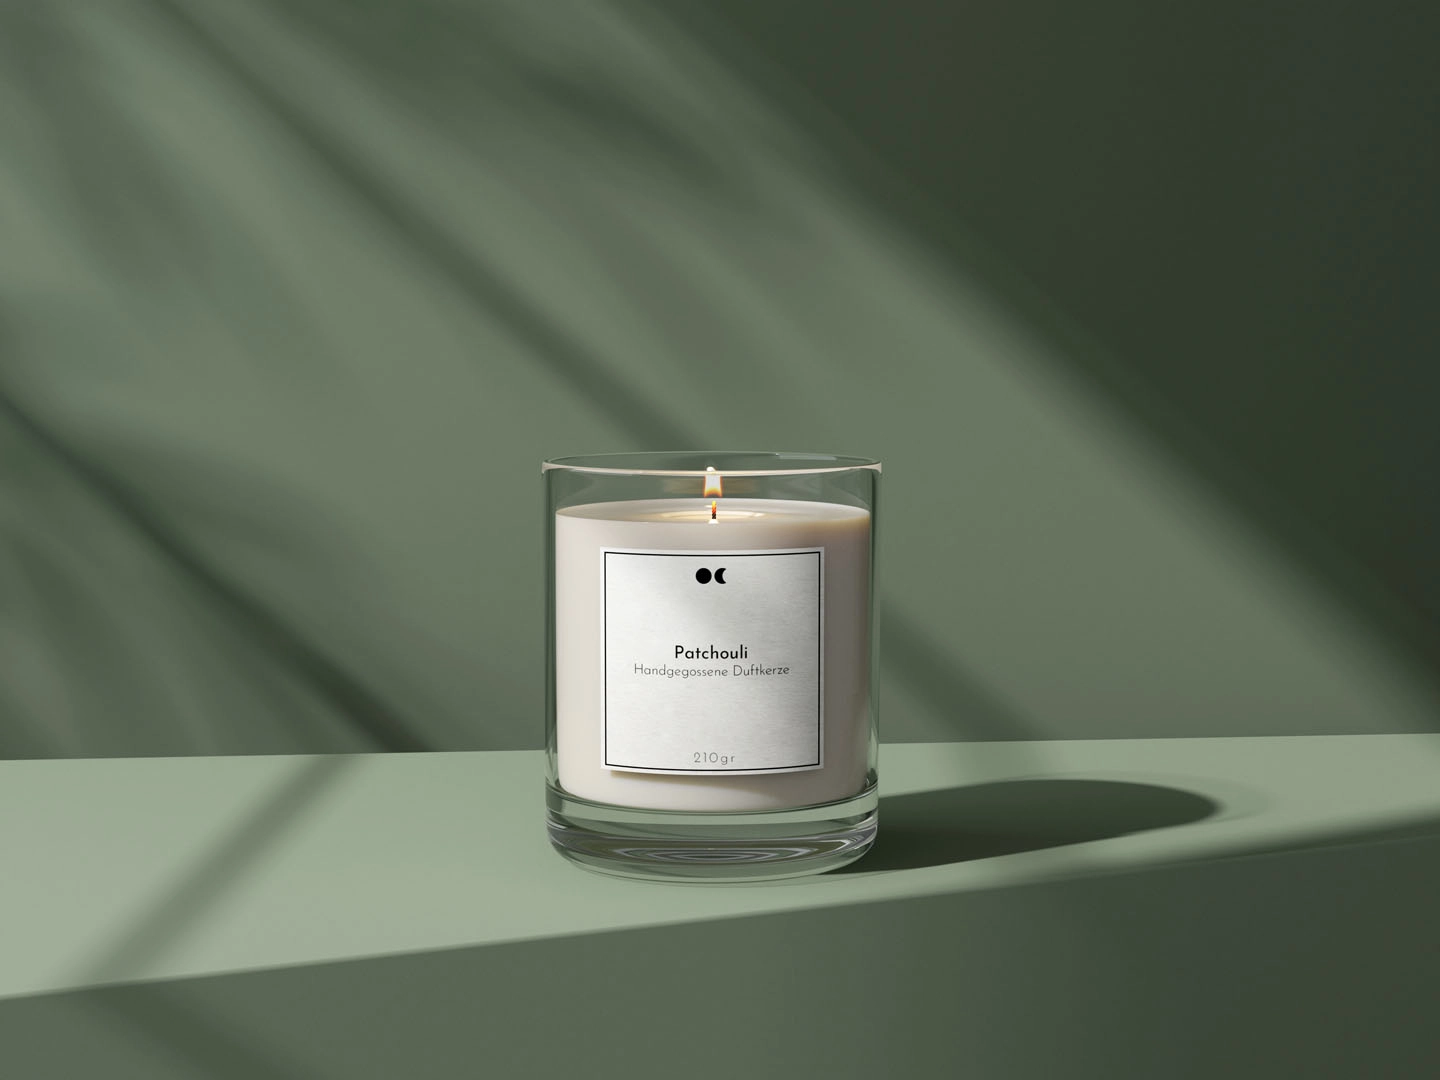 Patchouli scented candle